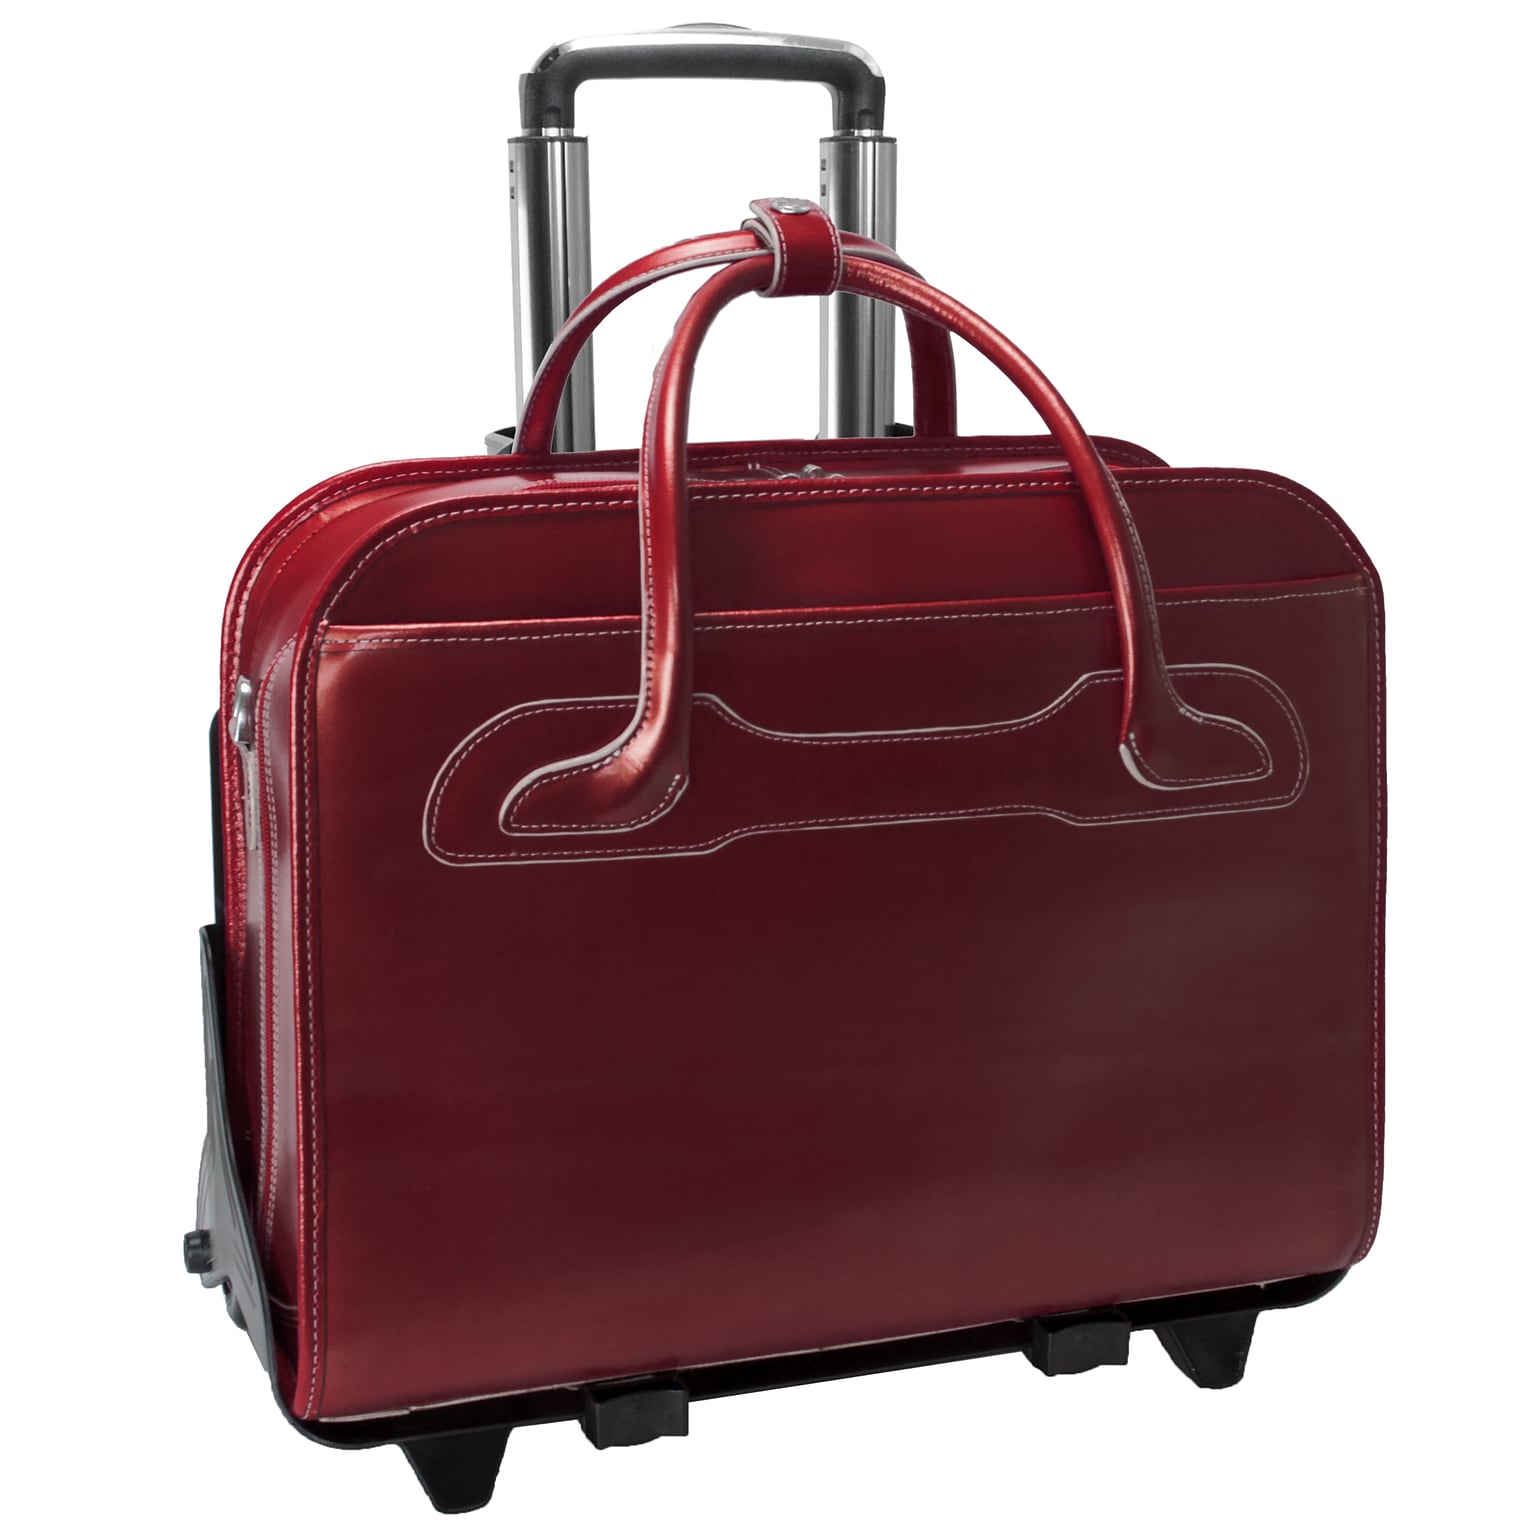 McKlein W Series, WILLOWBROOK, Genuine Cowhide Leather,Patented Detachable -Wheeled Ladies Laptop Briefcase, Red (94986)